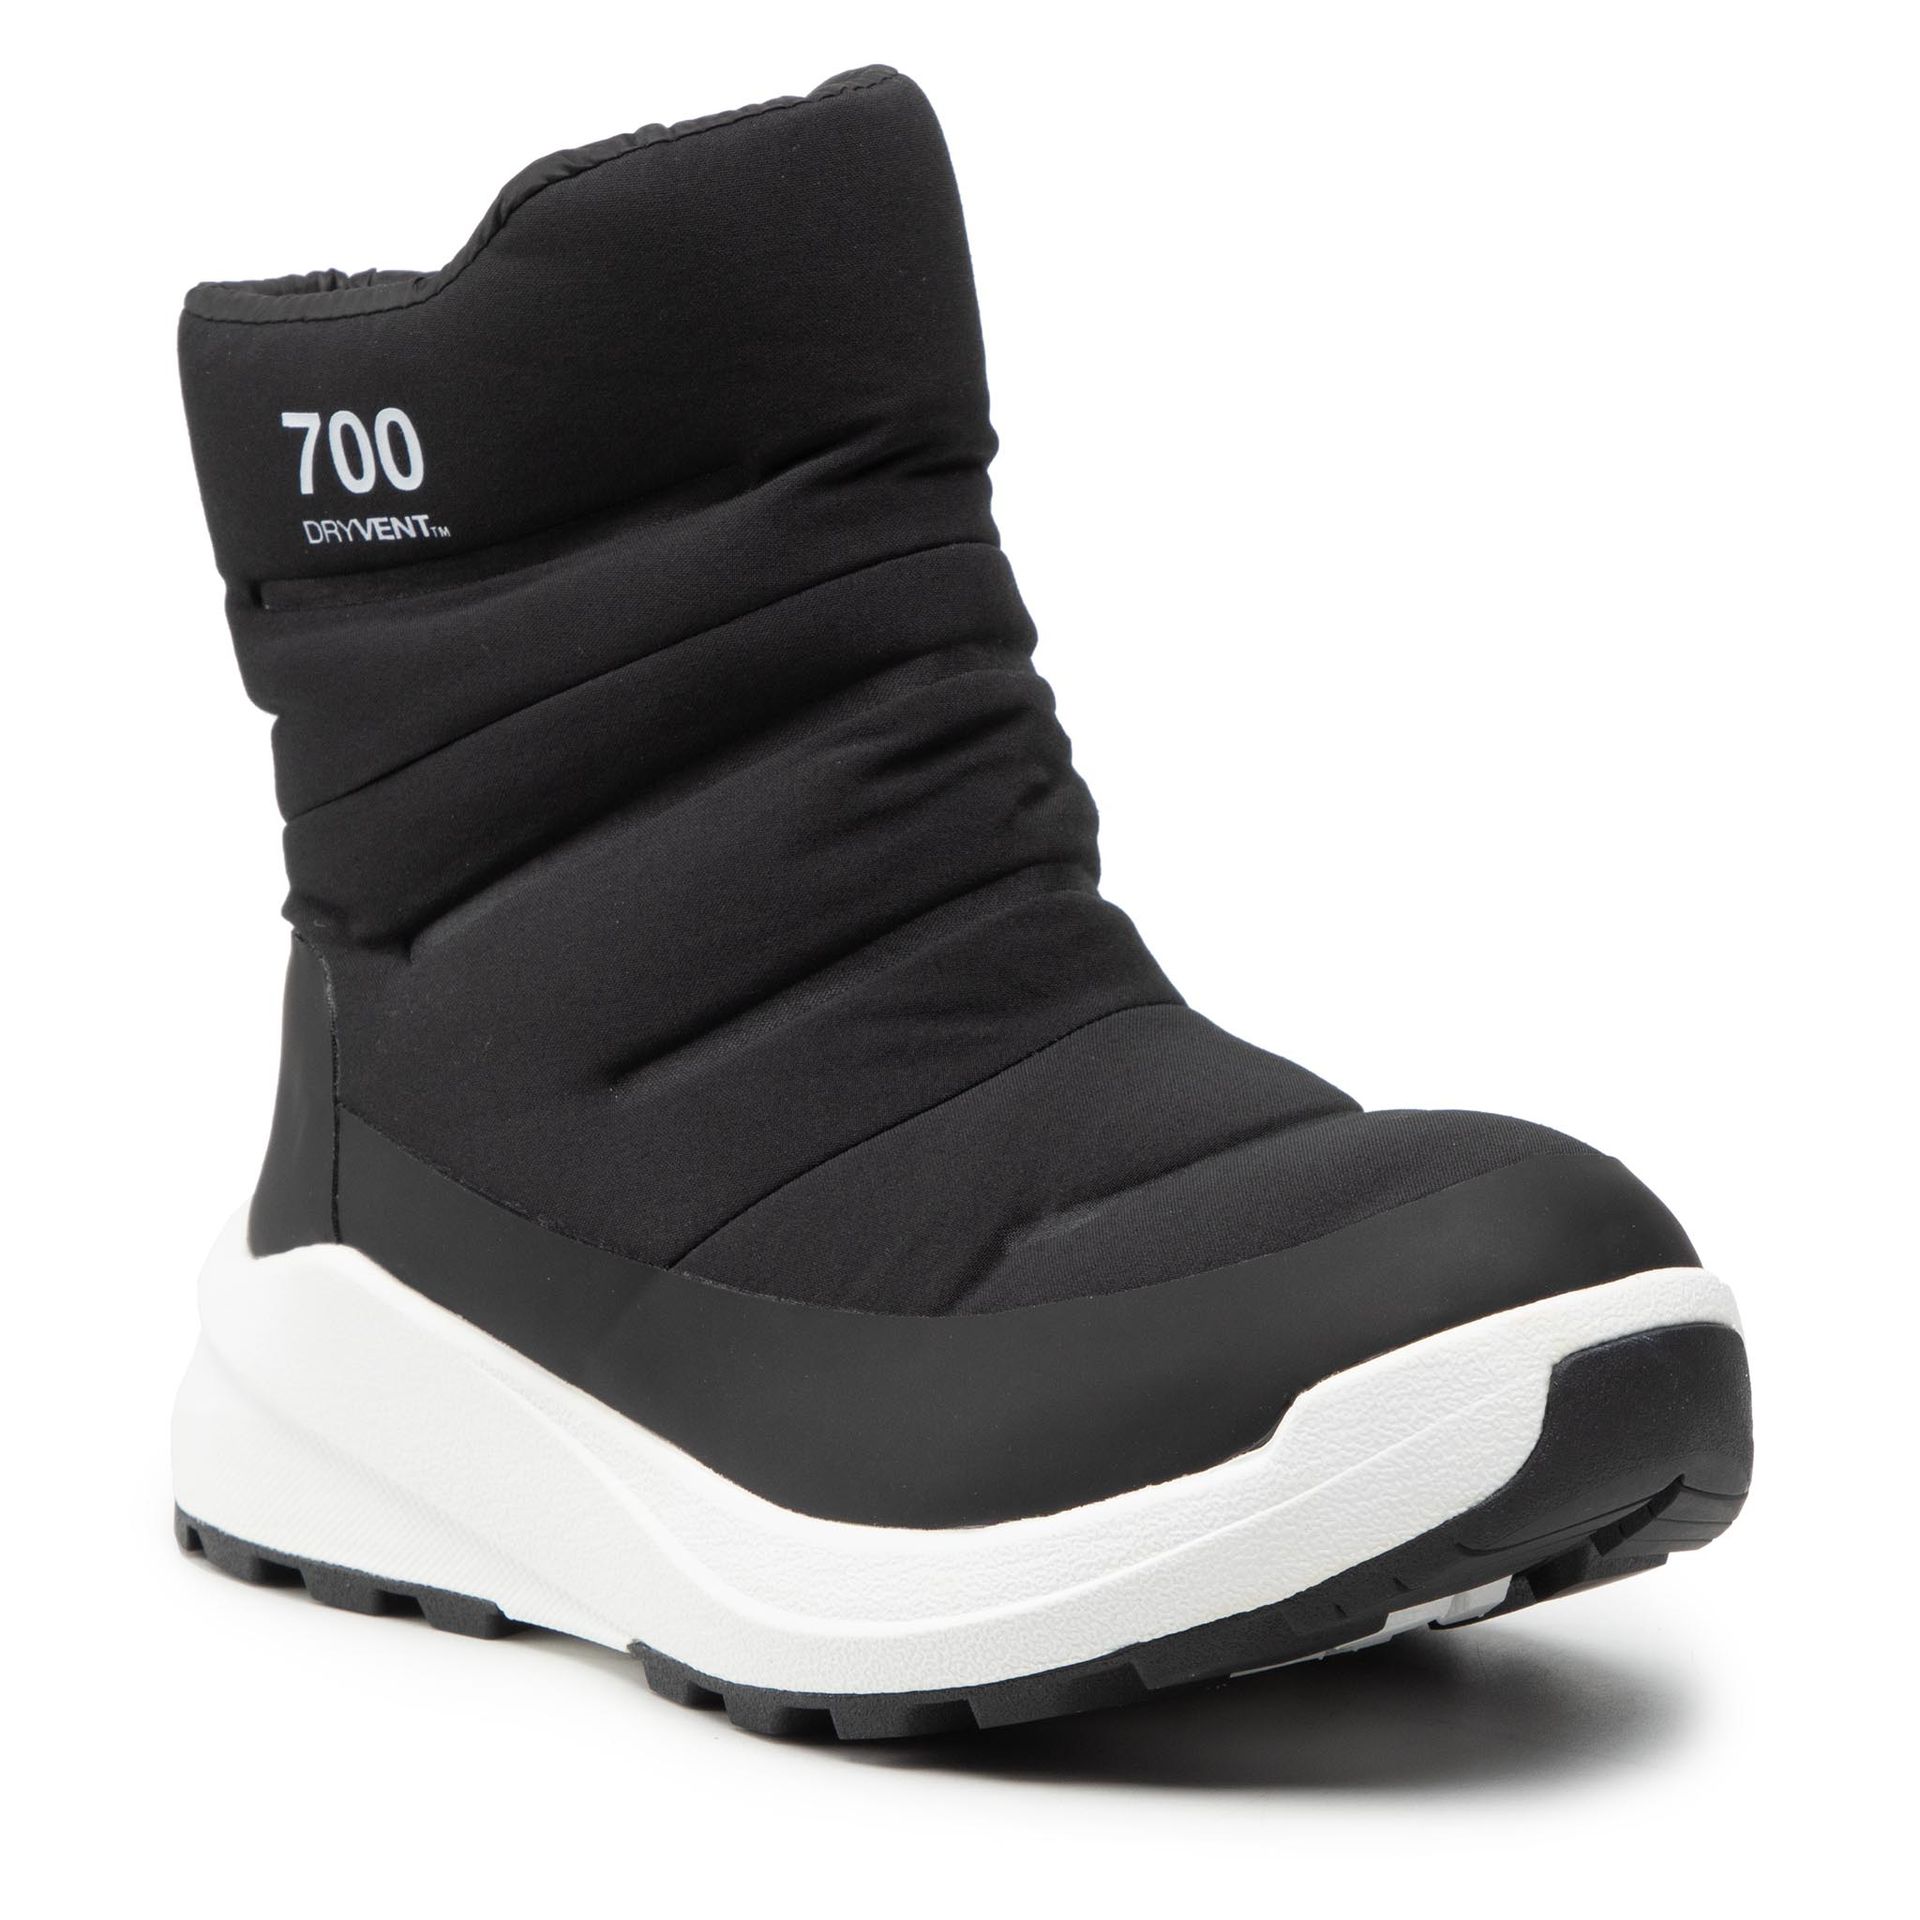 The North Face Śniegowce Nuptse II Bootie Wp NF0A5G2IKY41 Tnf Black/Tnf White